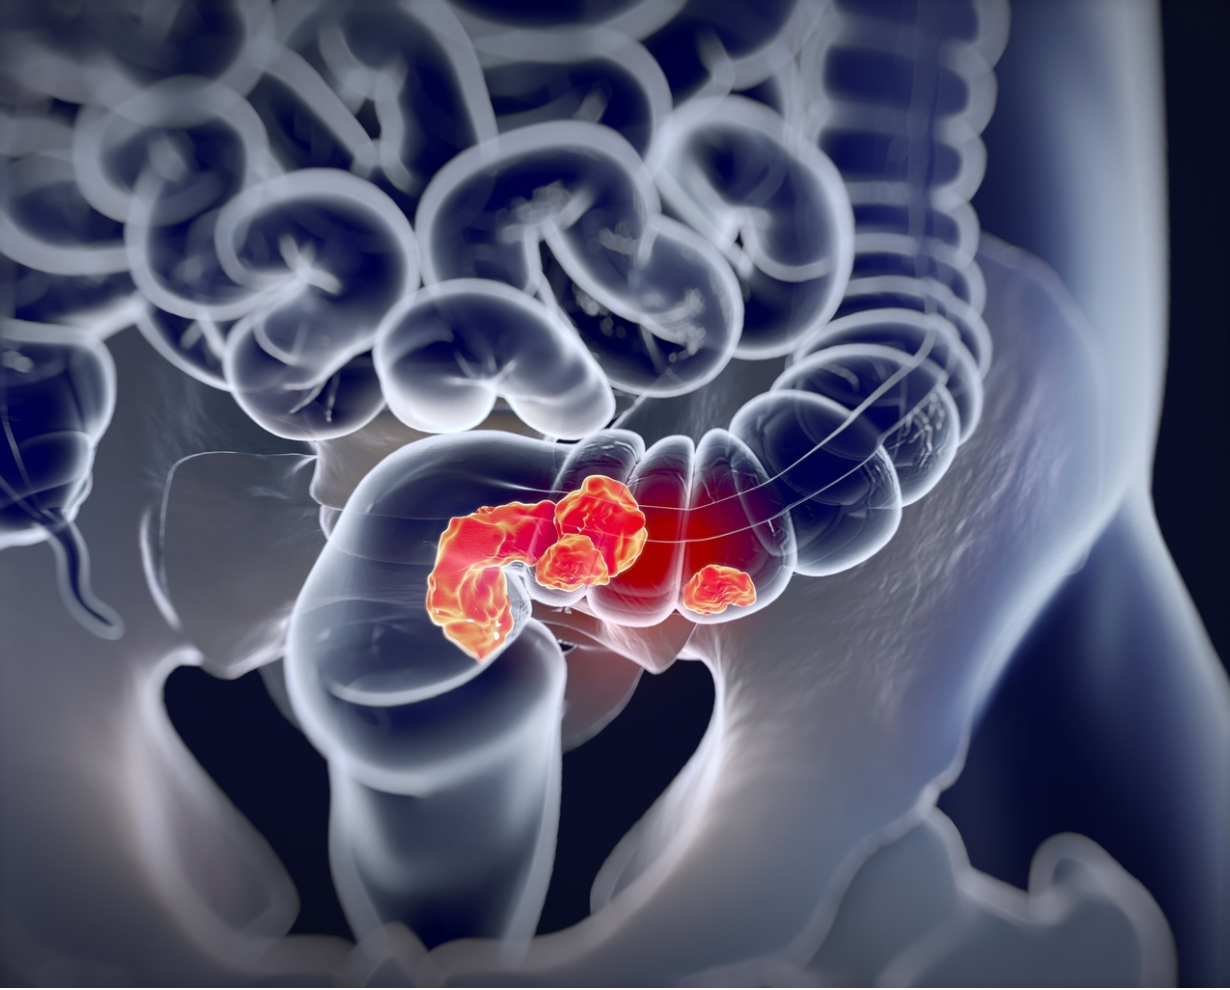 Patients at Average Risk of Colorectal Cancer May Prefer Stool-Based Screenings